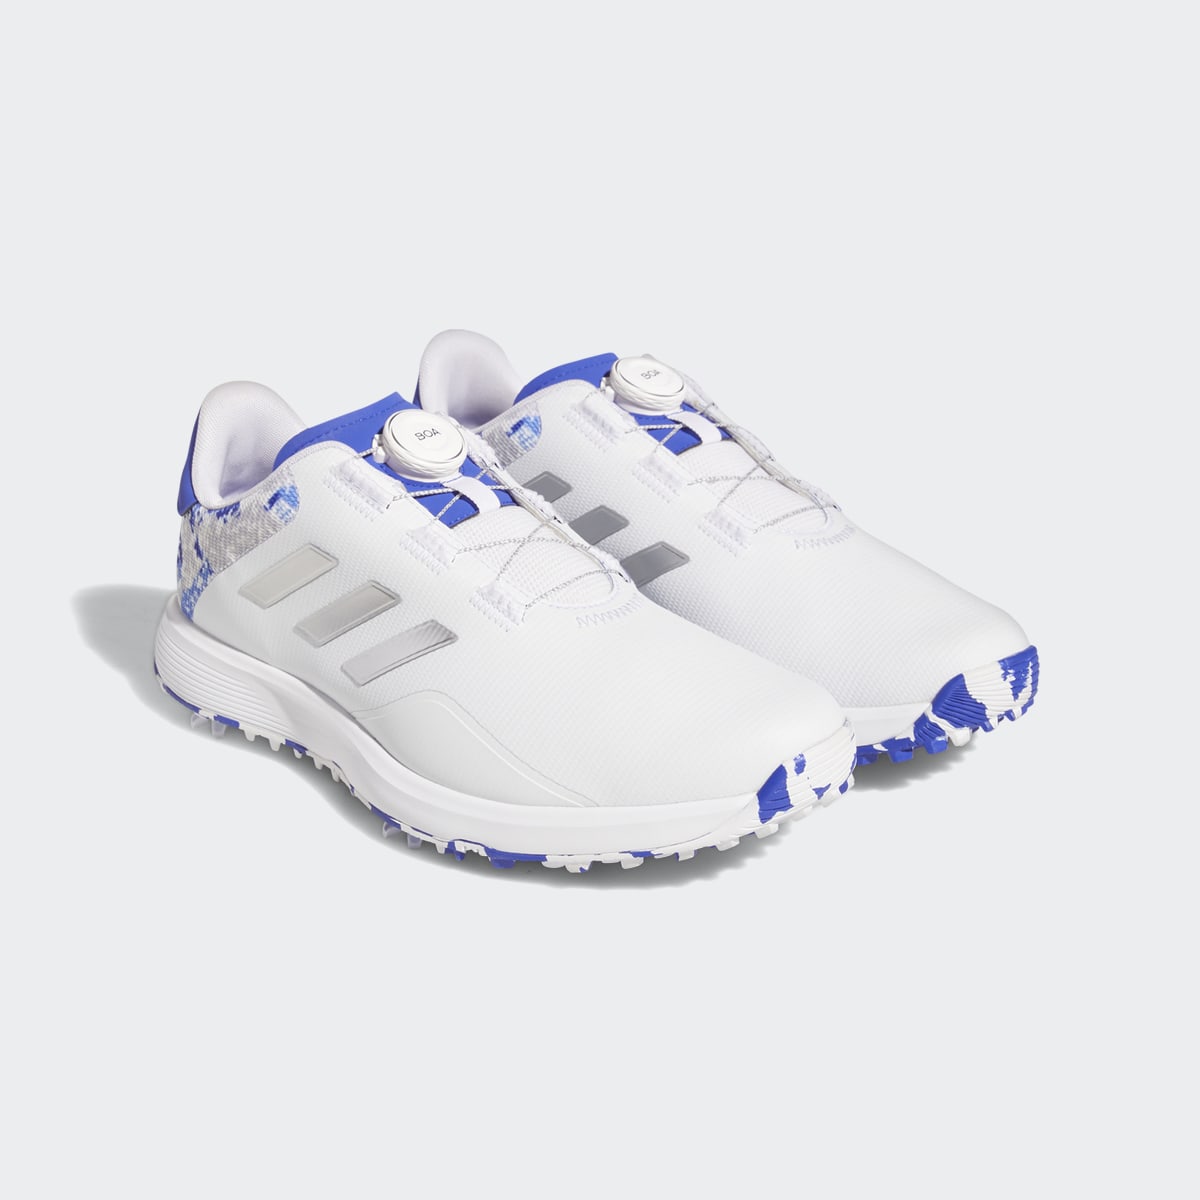 Adidas S2G BOA Wide Shoes. 8